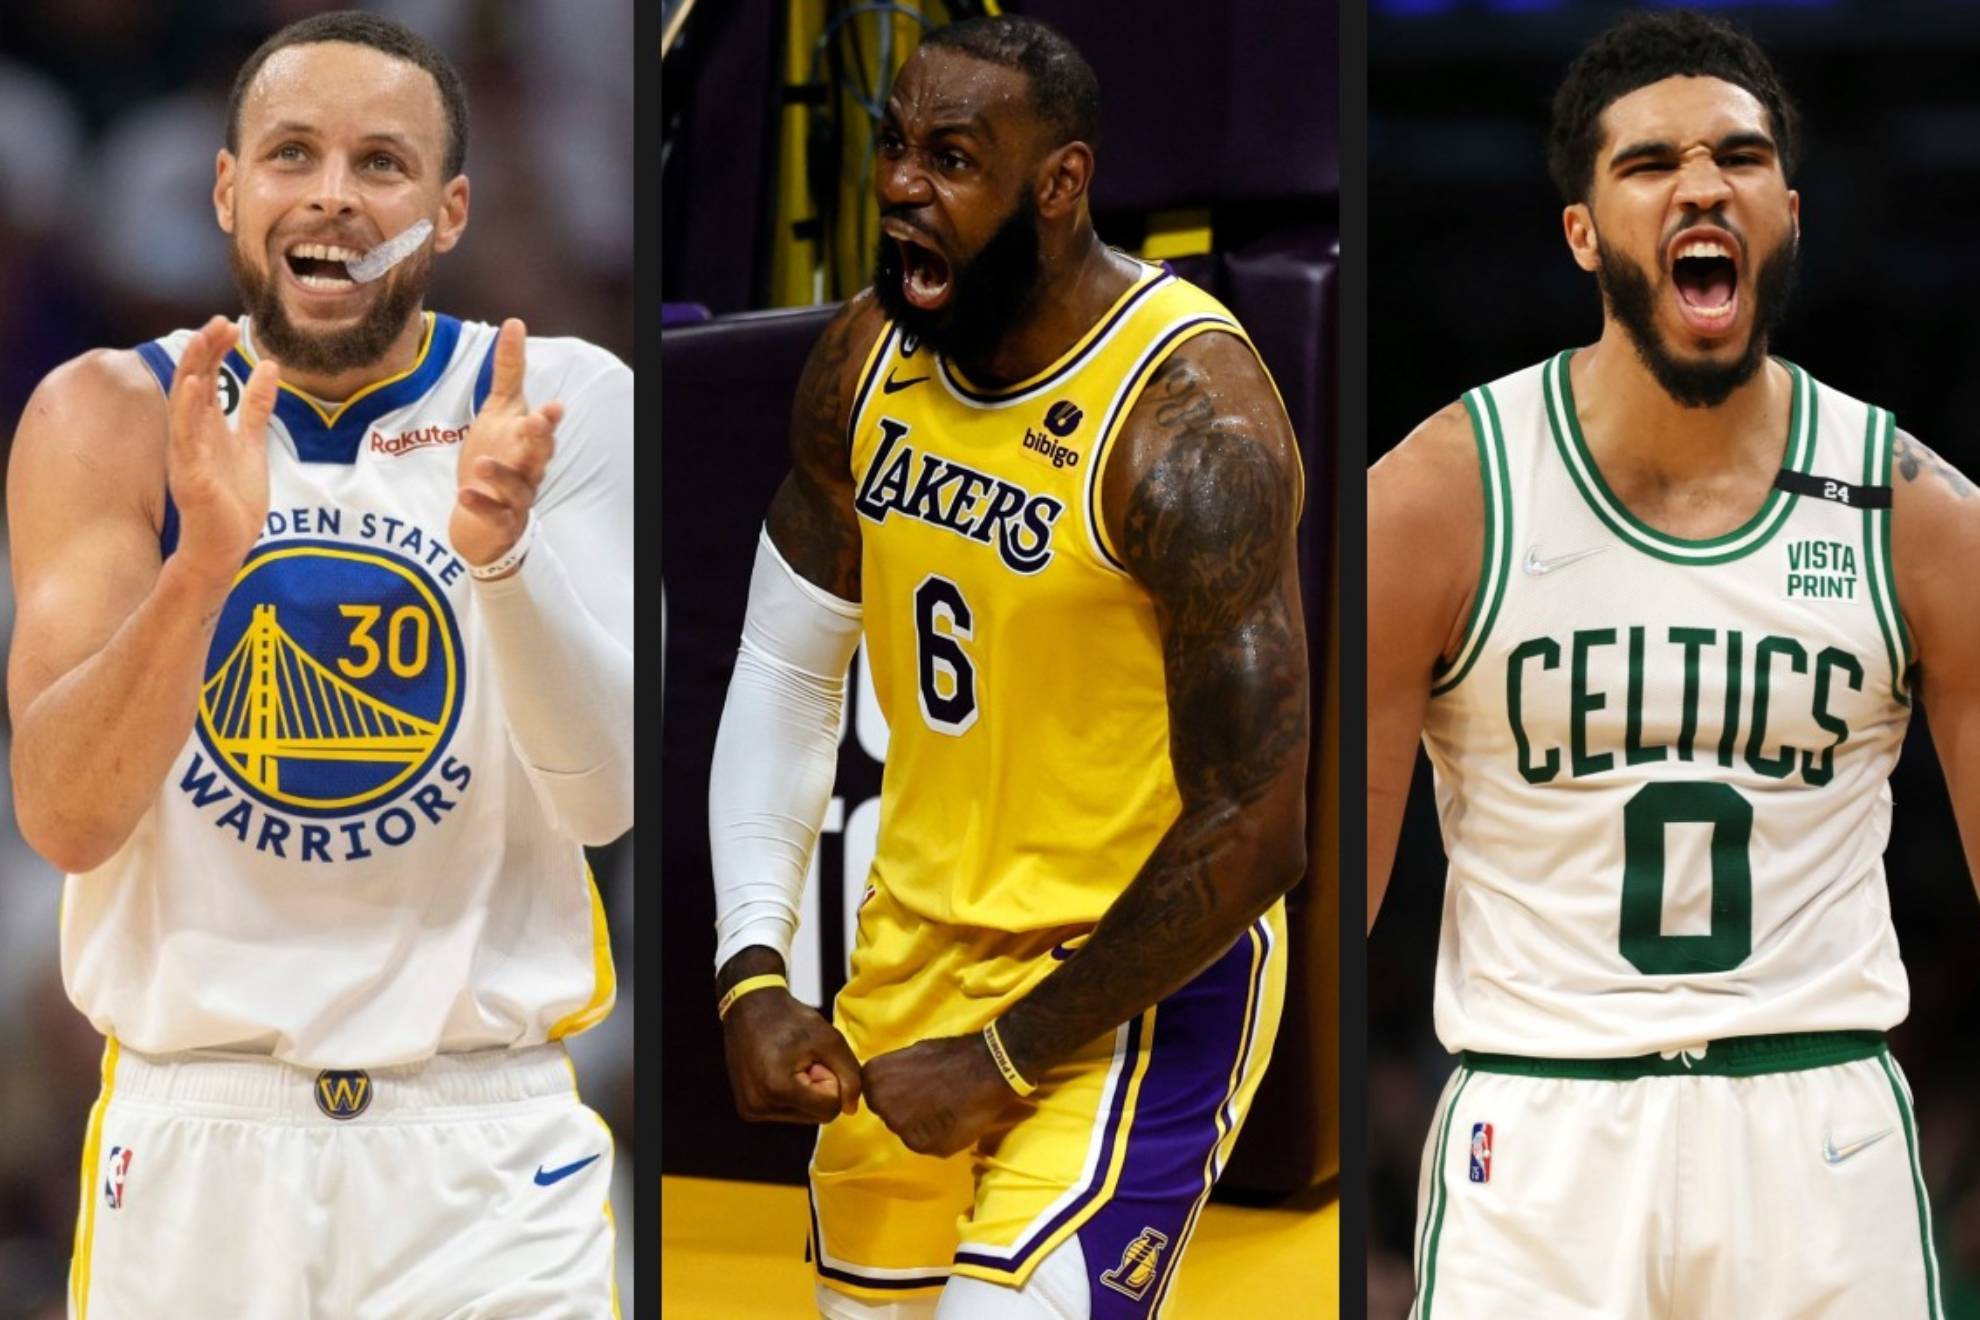 Who are the 11 NBA stars who want to play with LeBron James at the Paris 2024 Olympics?